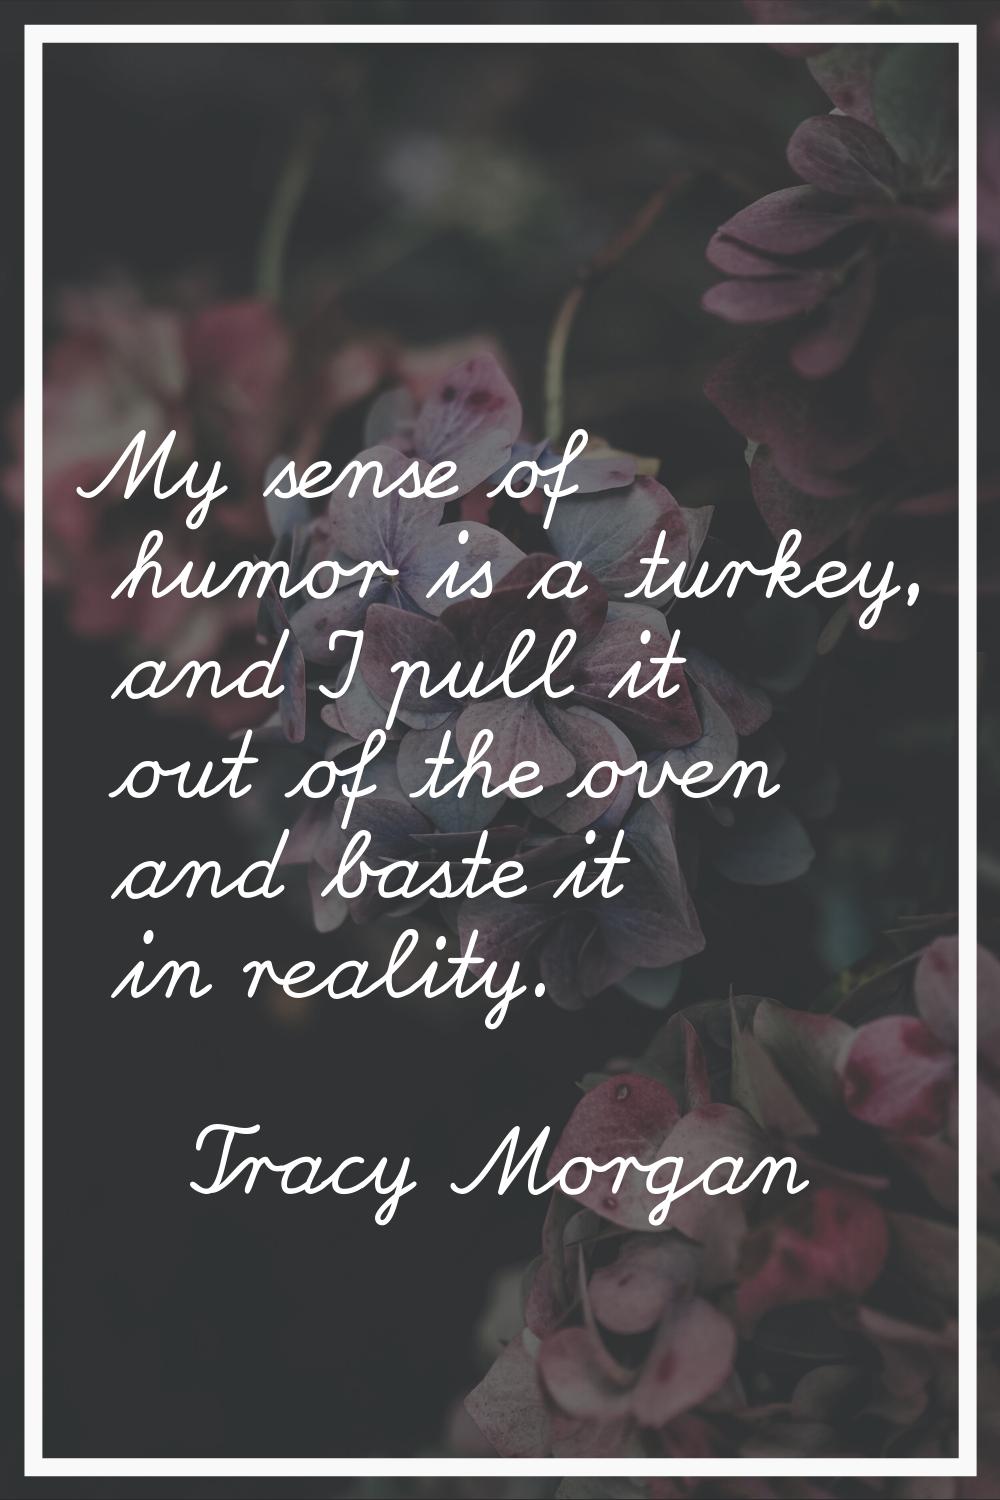 My sense of humor is a turkey, and I pull it out of the oven and baste it in reality.